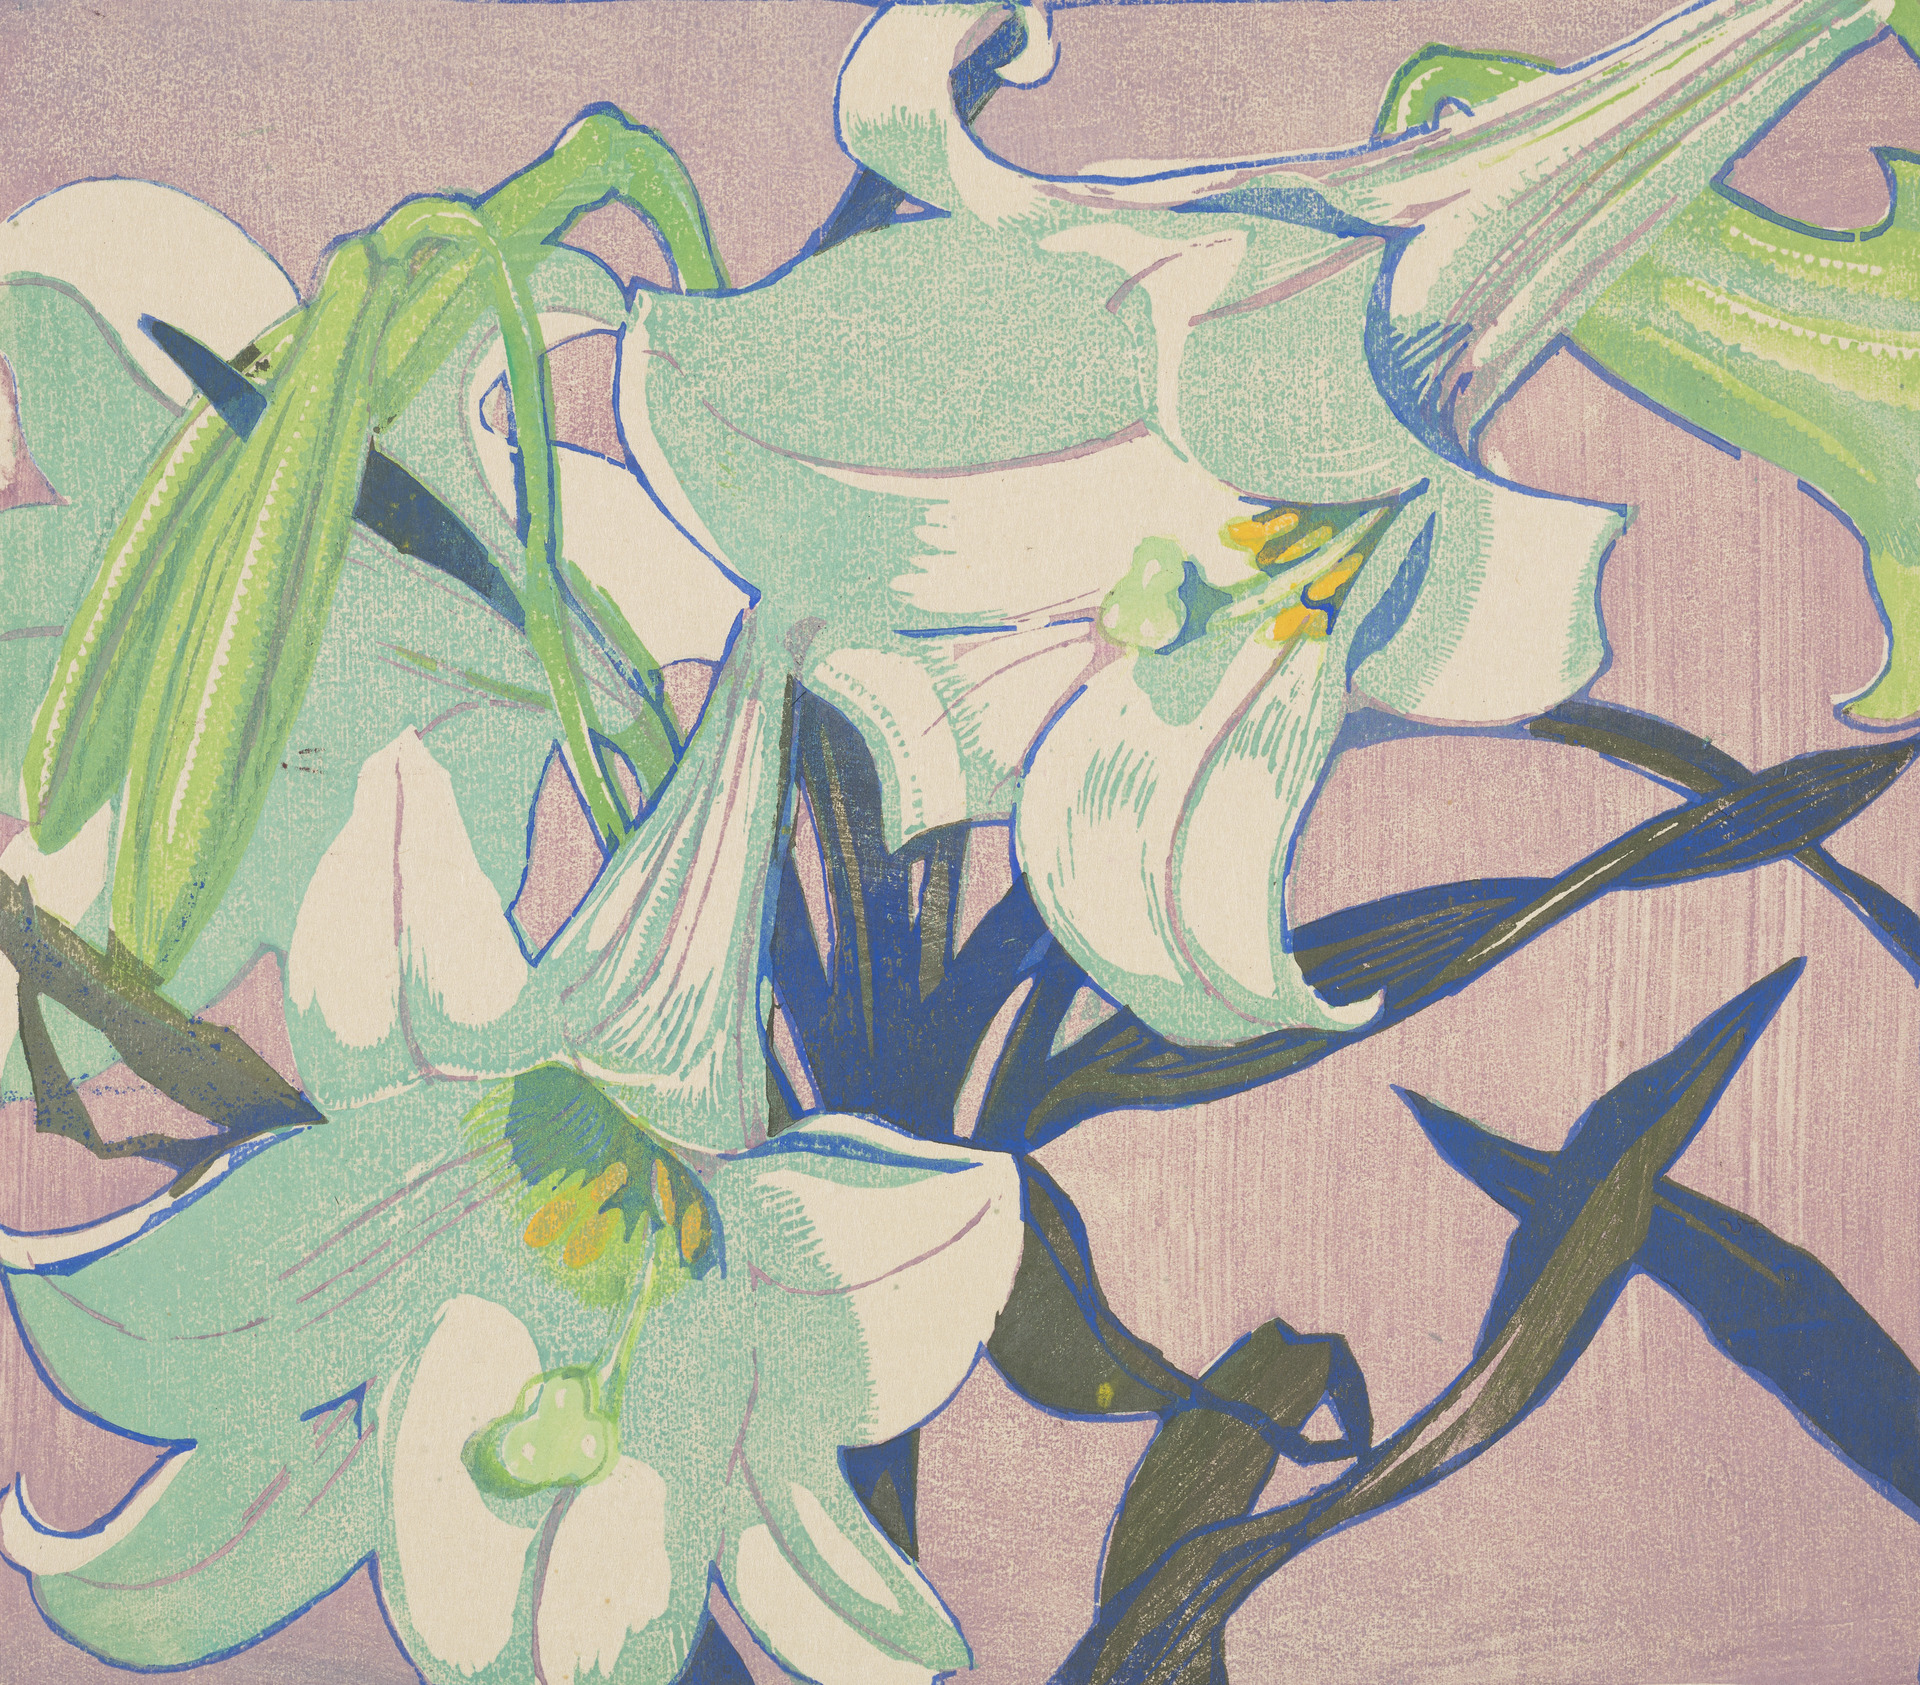 White Lilies by Mabel Royds - c. 1937 - 21.2 x 24 cm National Galleries of Scotland